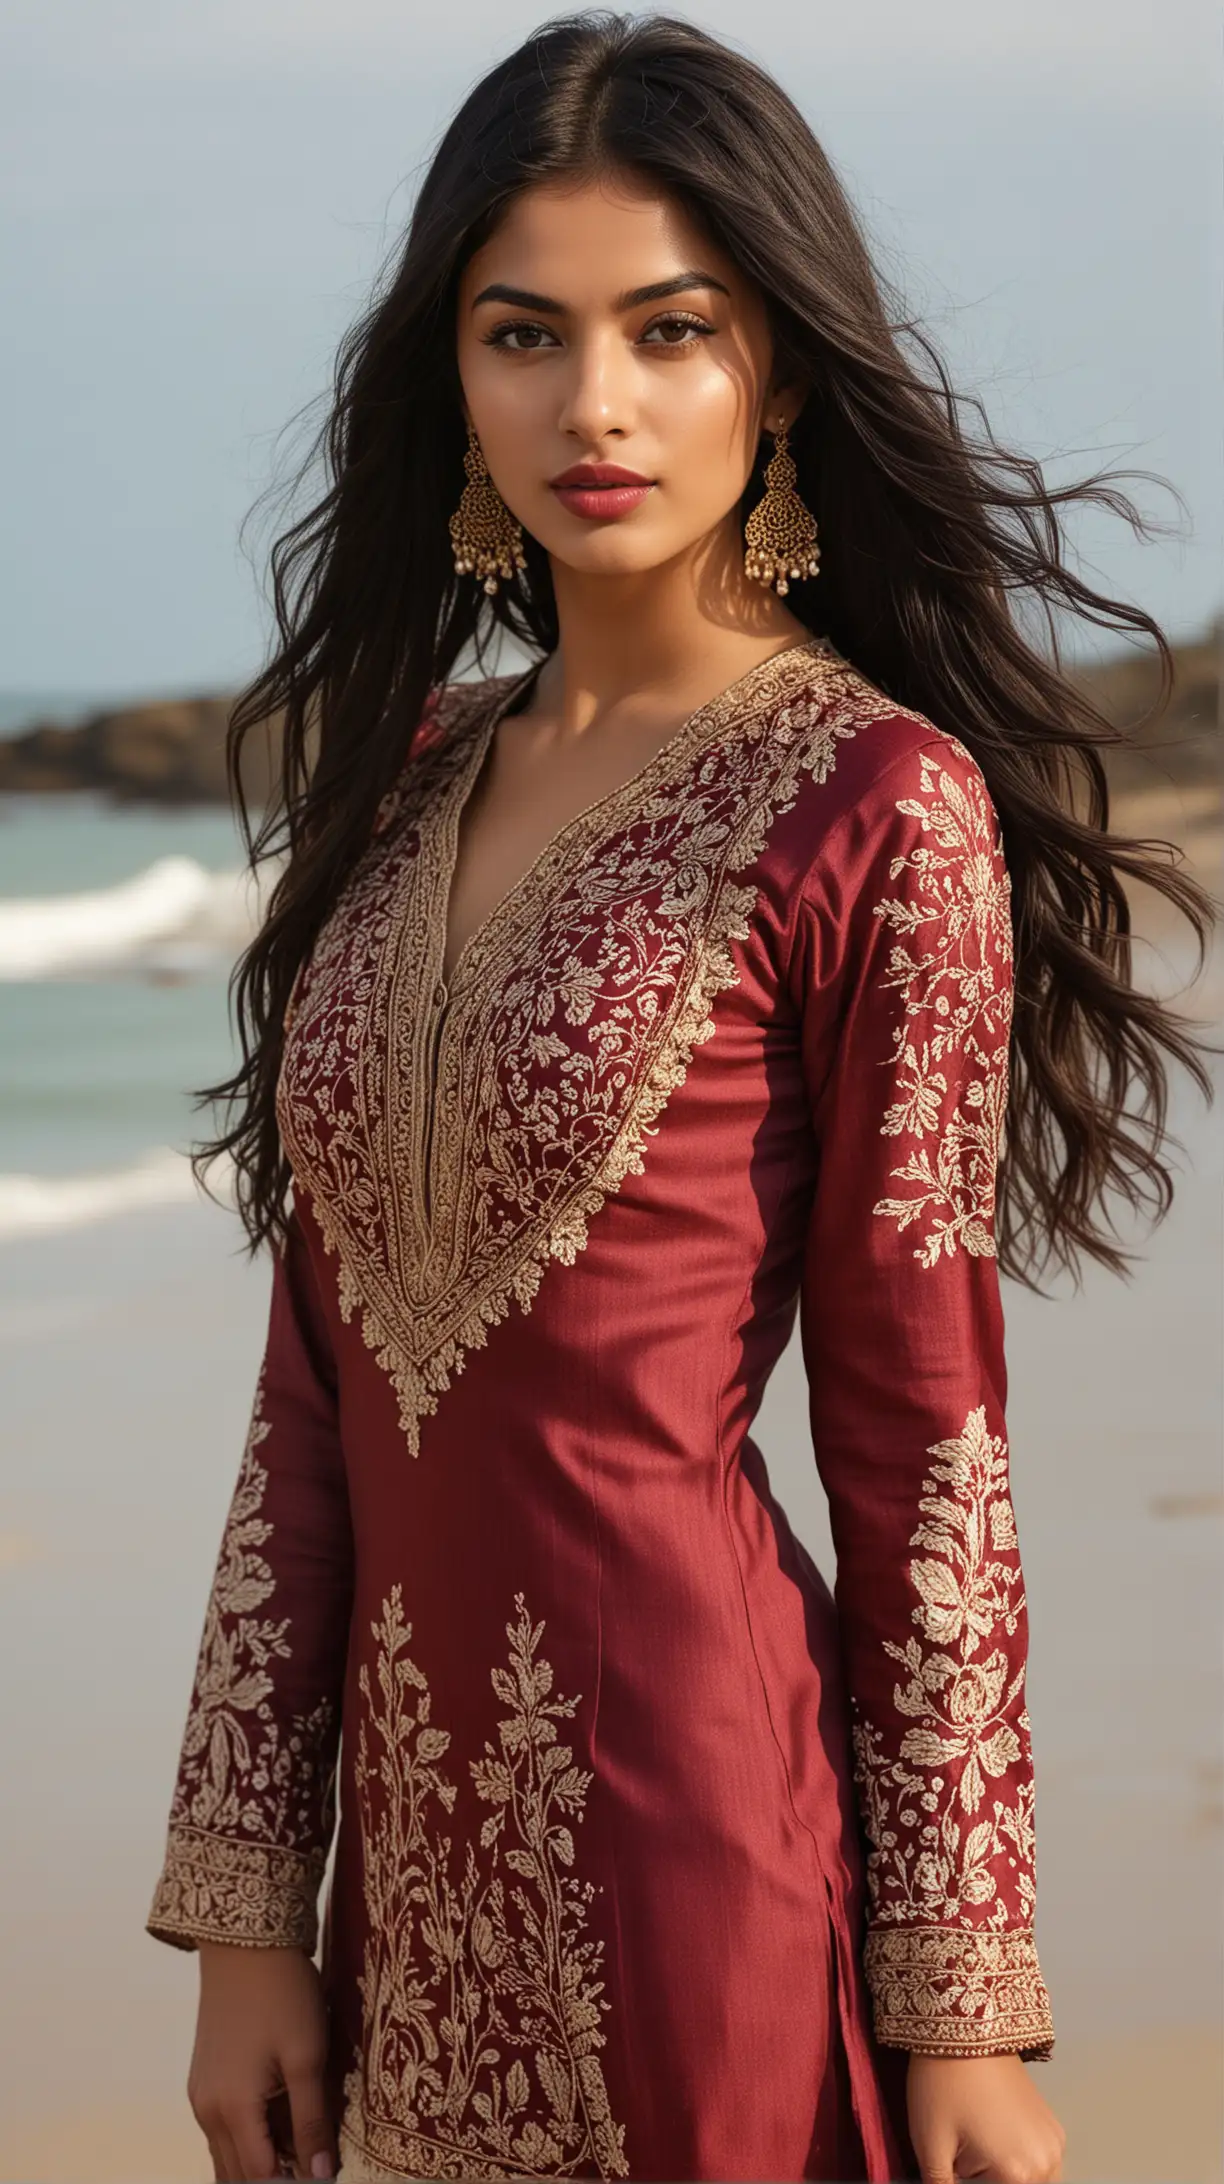 Very stunning, beautiful and sexy 18 year old British girl sensually dressed in an expensive maroon and beige Indian salwaar kameez, glossy look, seductive look, maroon lipstick, long black hair, glow on face, intricate details, standing in front of a beach in England, photo realistic, only upper-body, face and background shown, blurry background, 4k, vivid colours, dramatic lighting